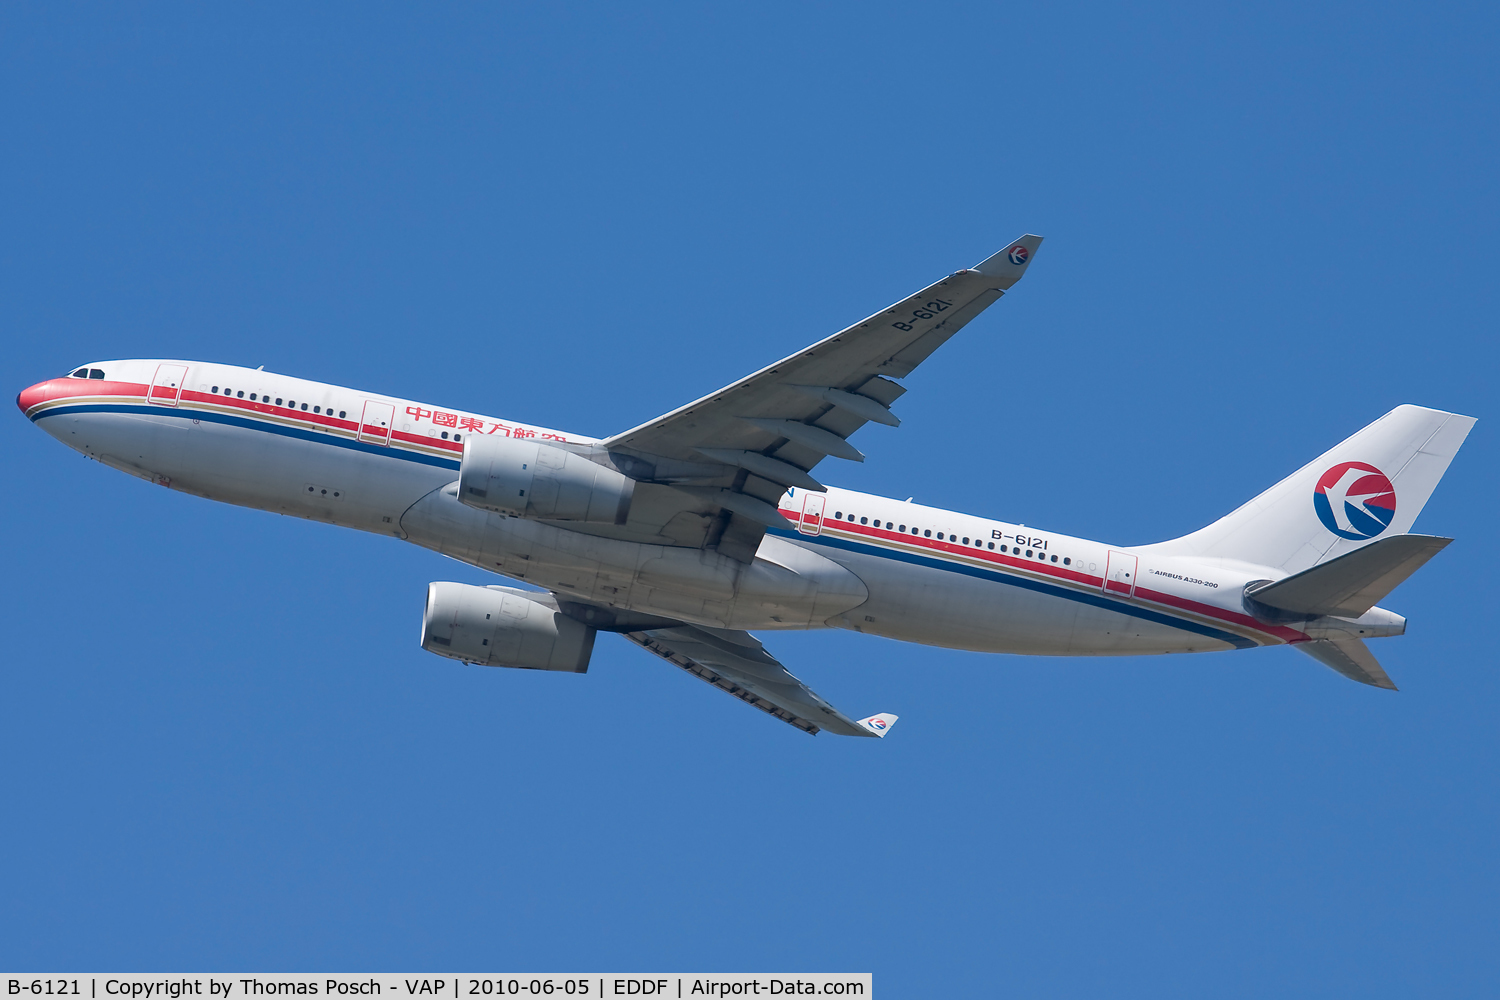 B-6121, 2006 Airbus A330-243 C/N 728, China Eastern Airlines